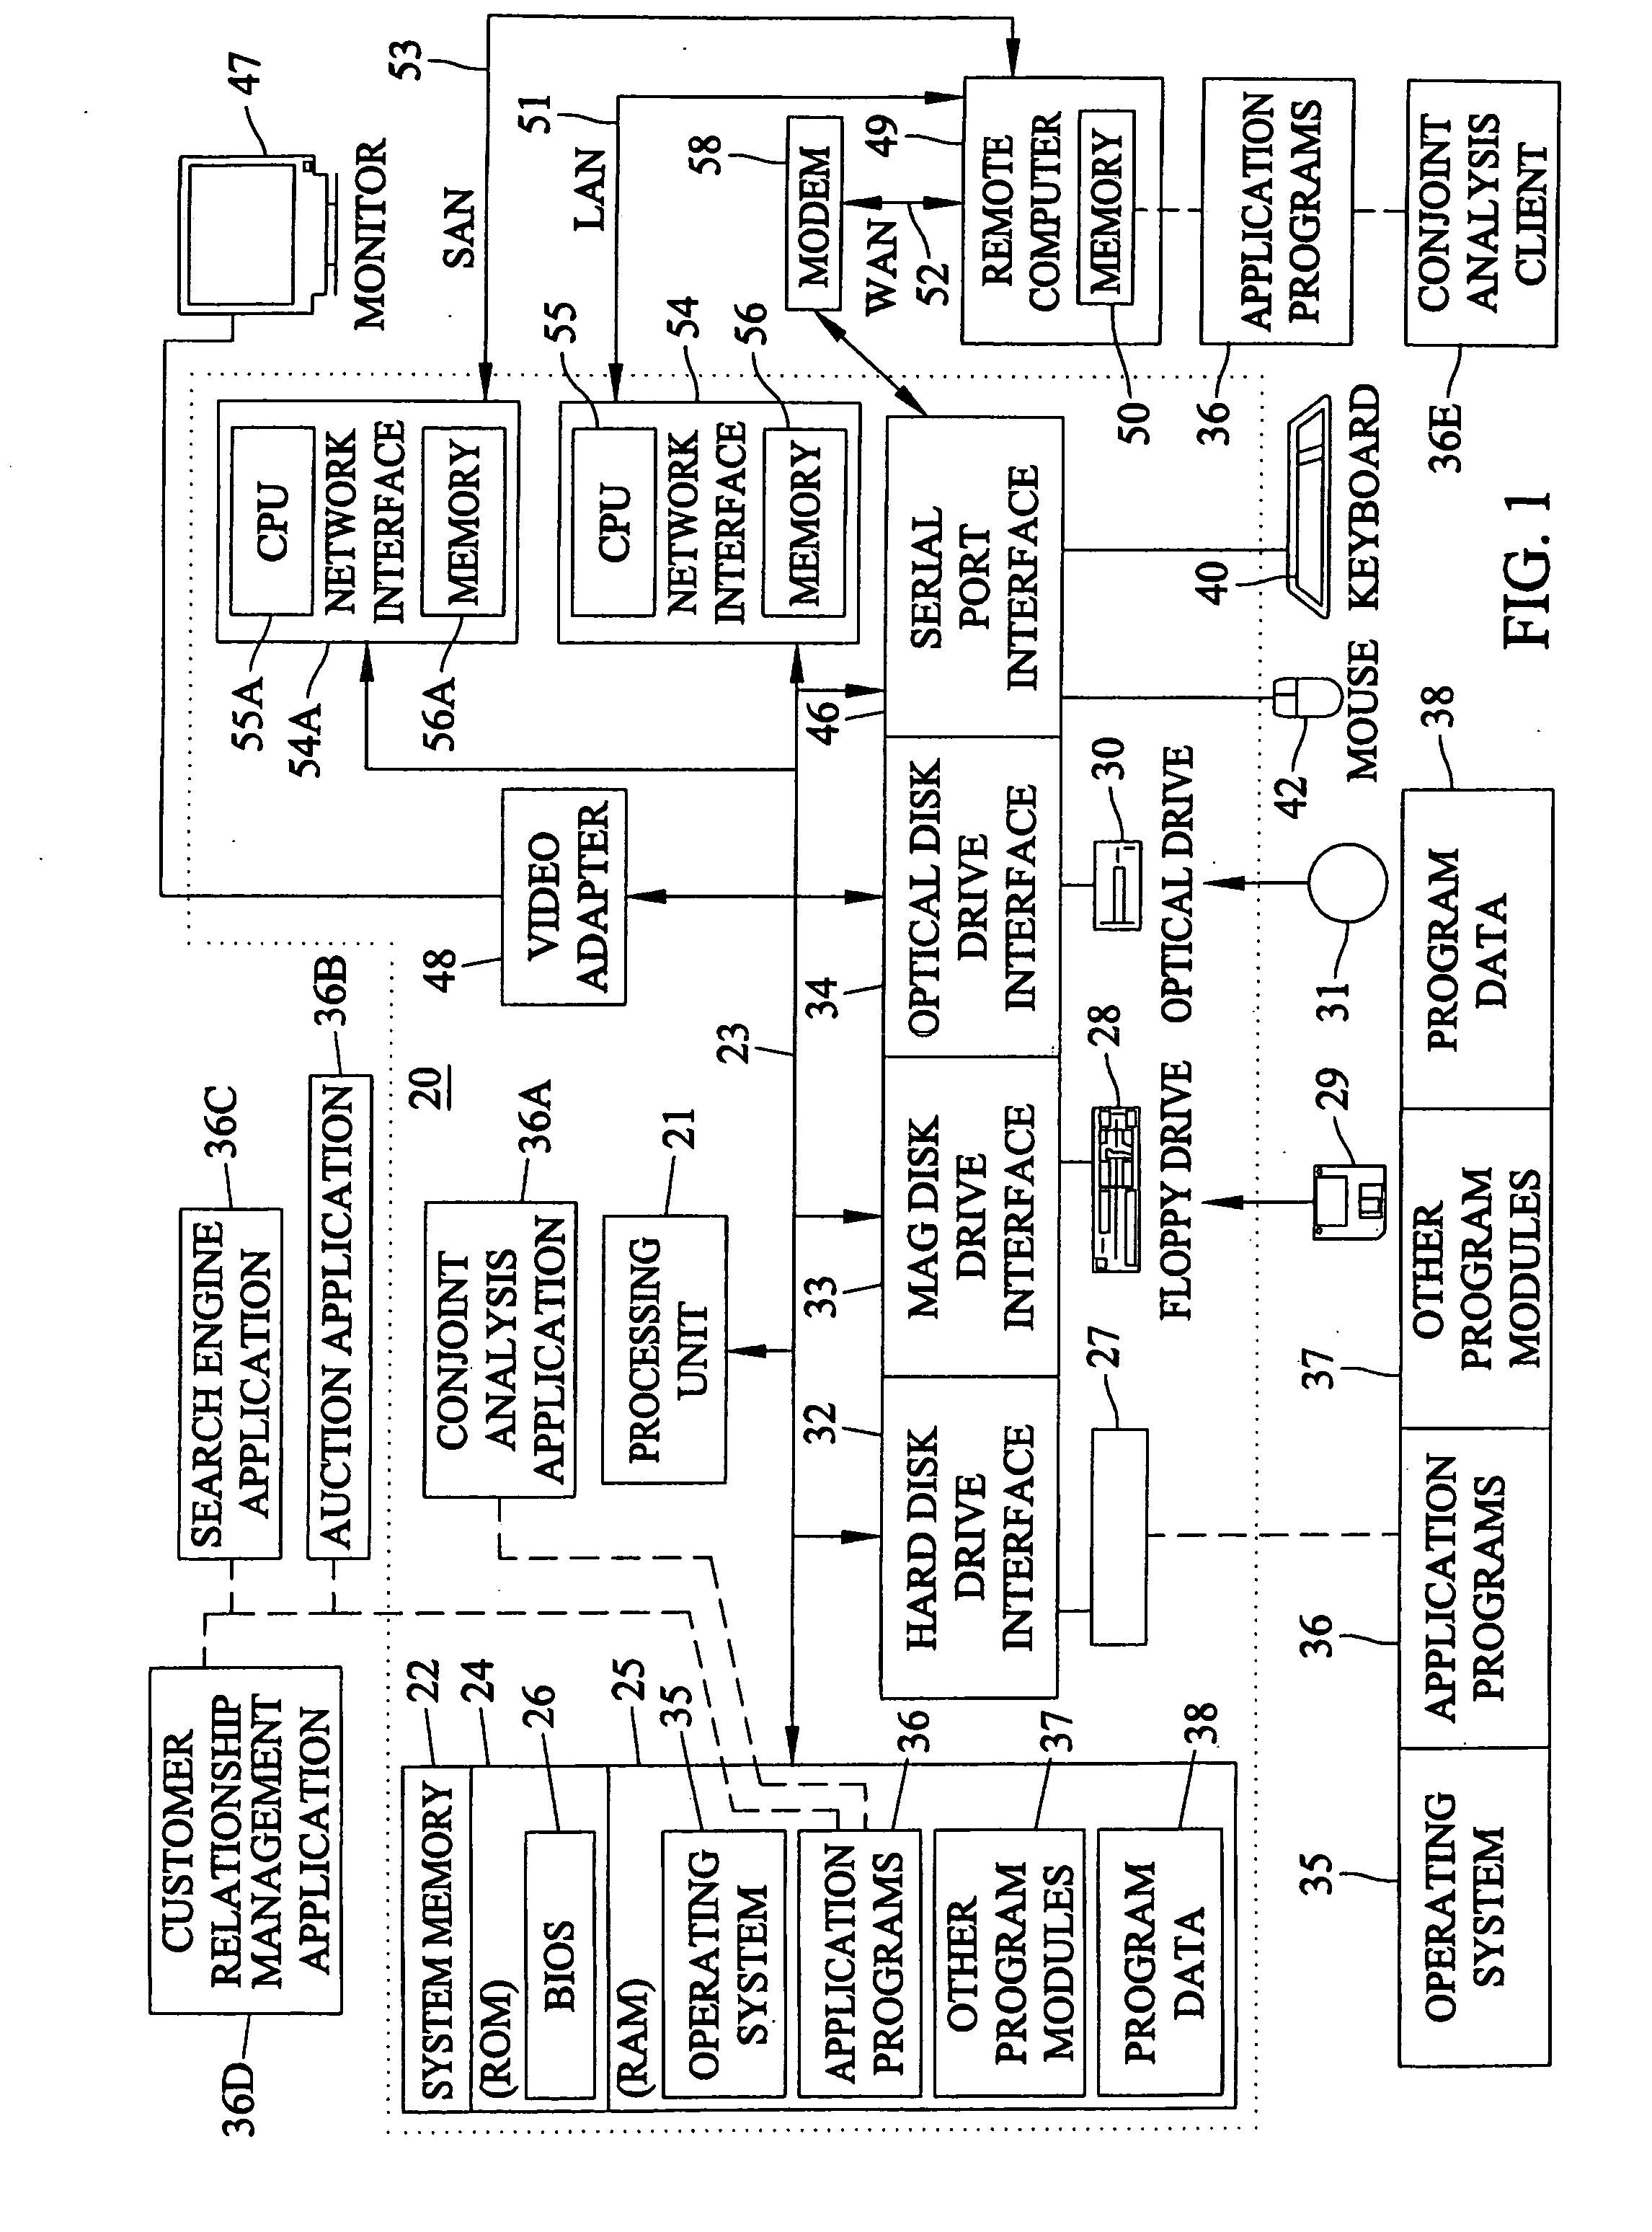 Methods, systems, and computer program products for facilitating user interaction with customer relationship management, auction, and search engine software using conjoint analysis